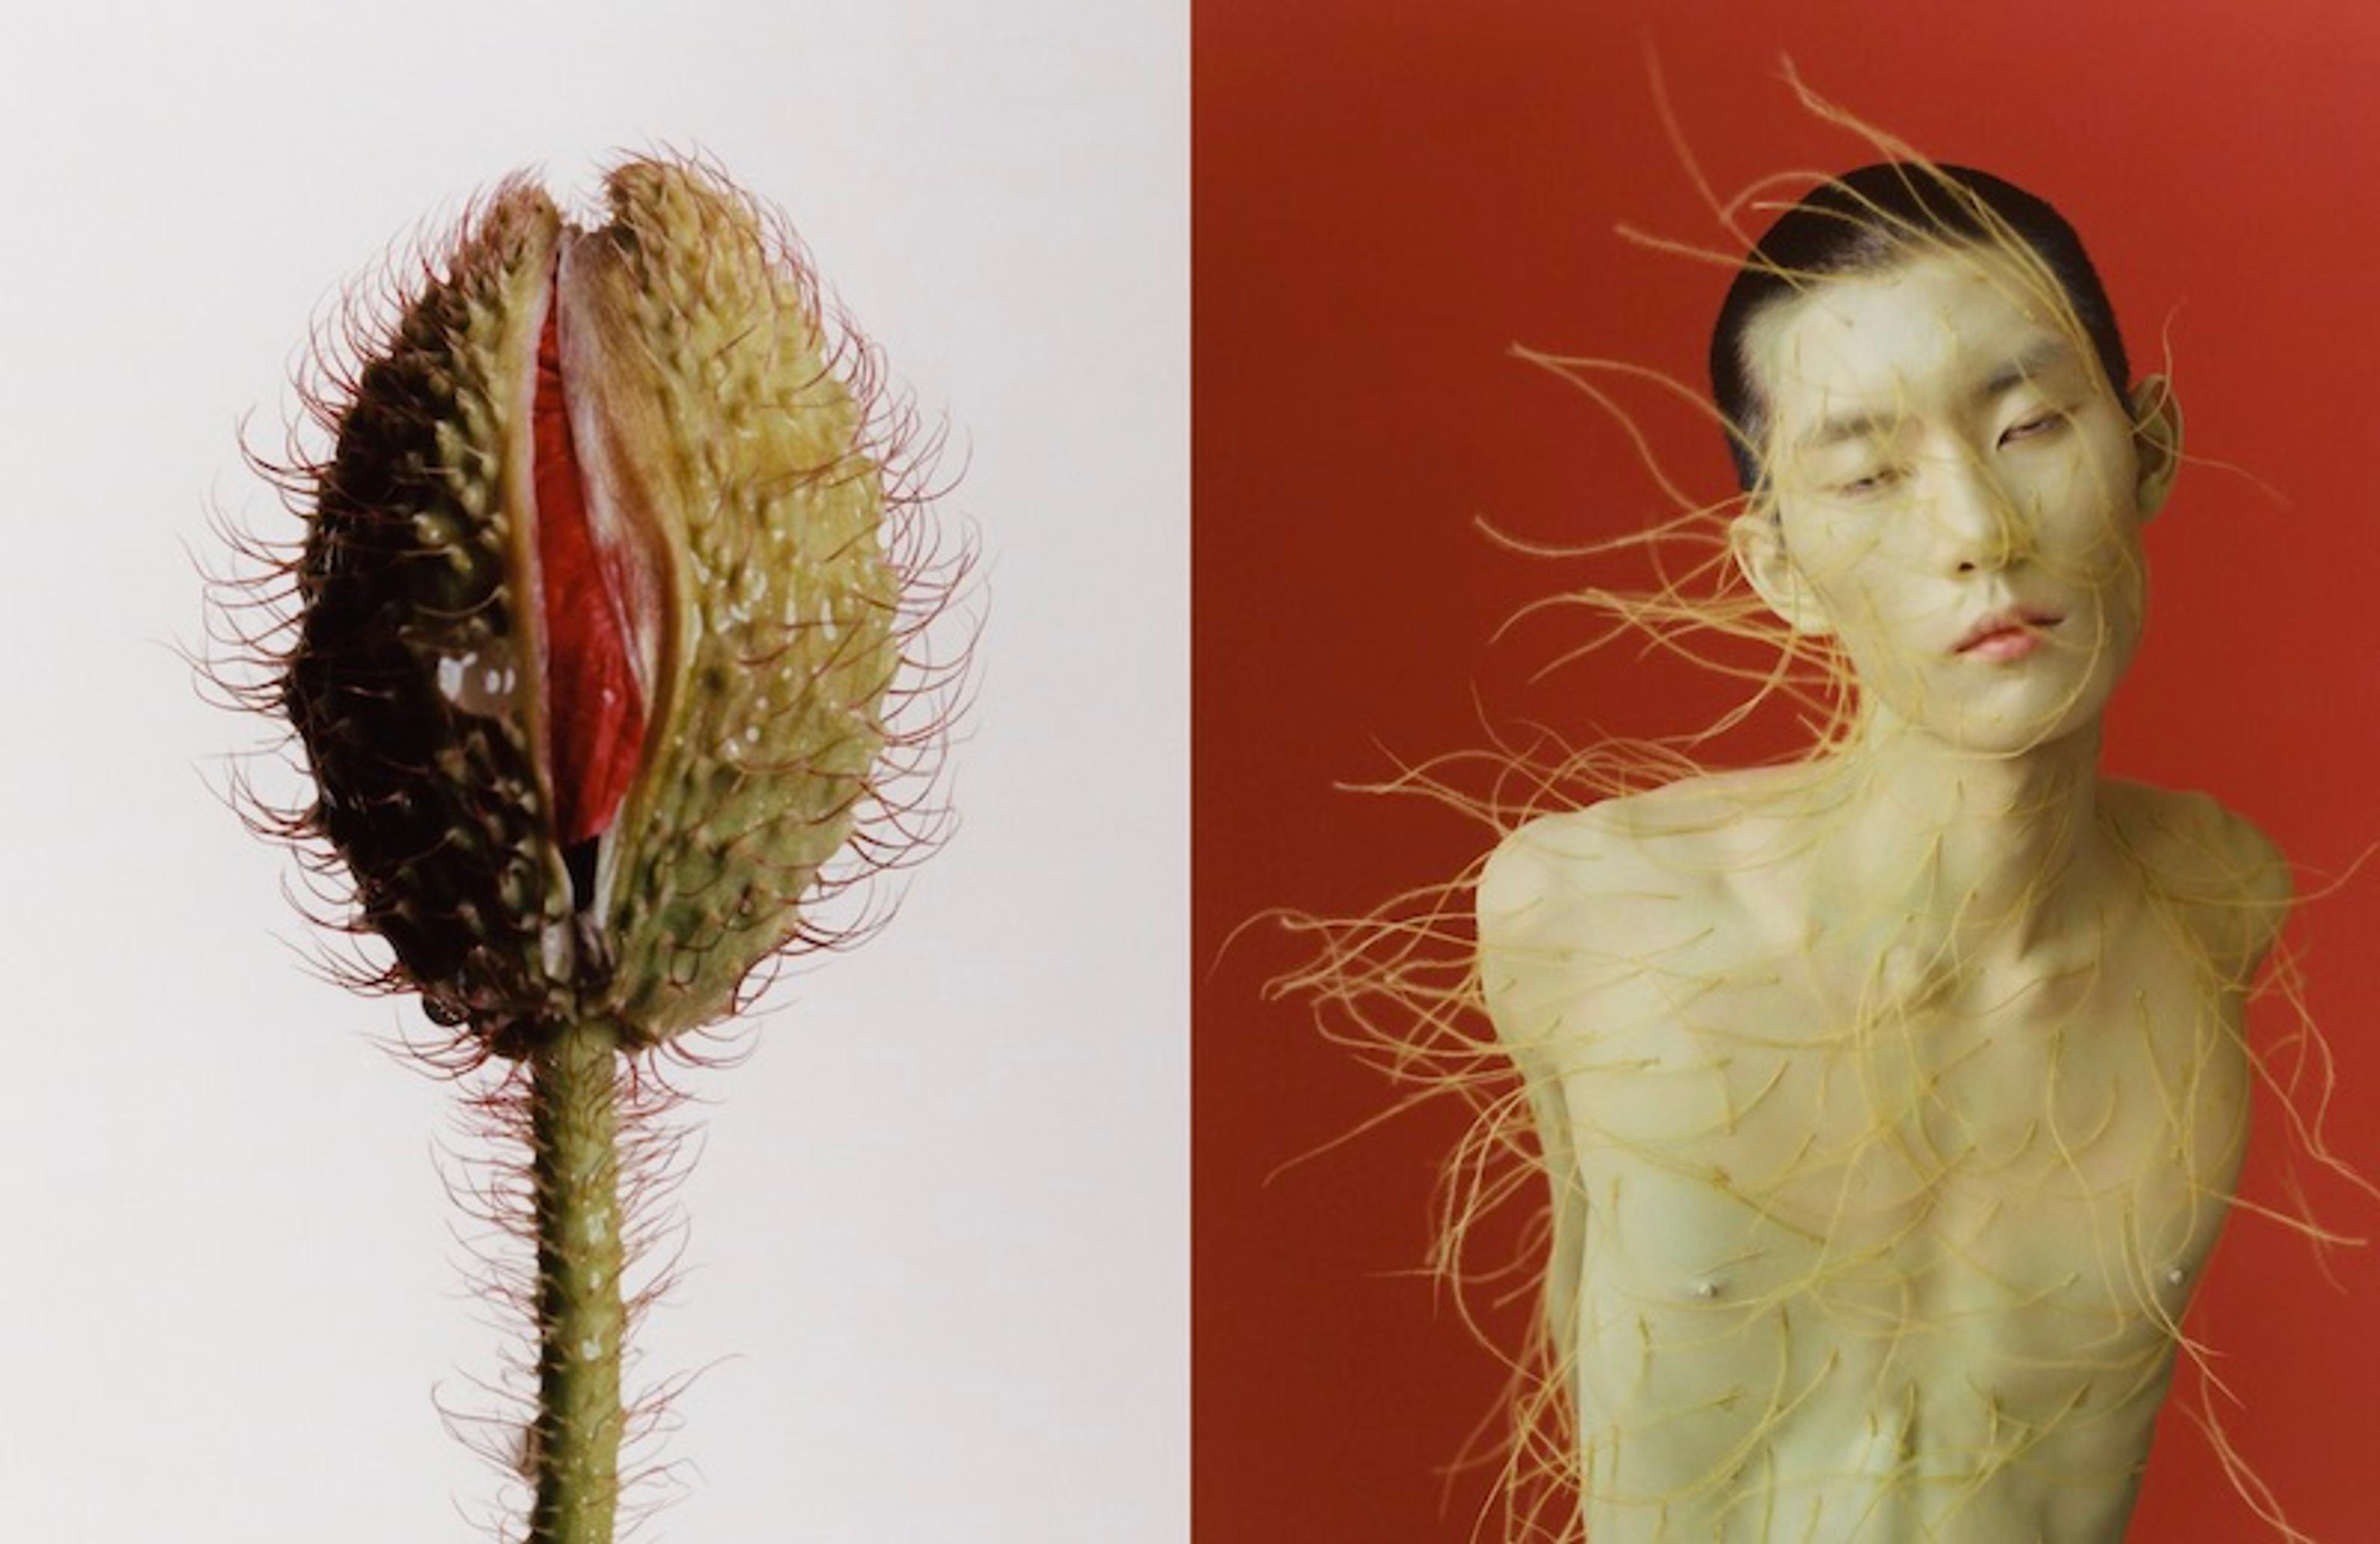 Side-by-side photographs of a venus flytrap and a nude man from the waist up